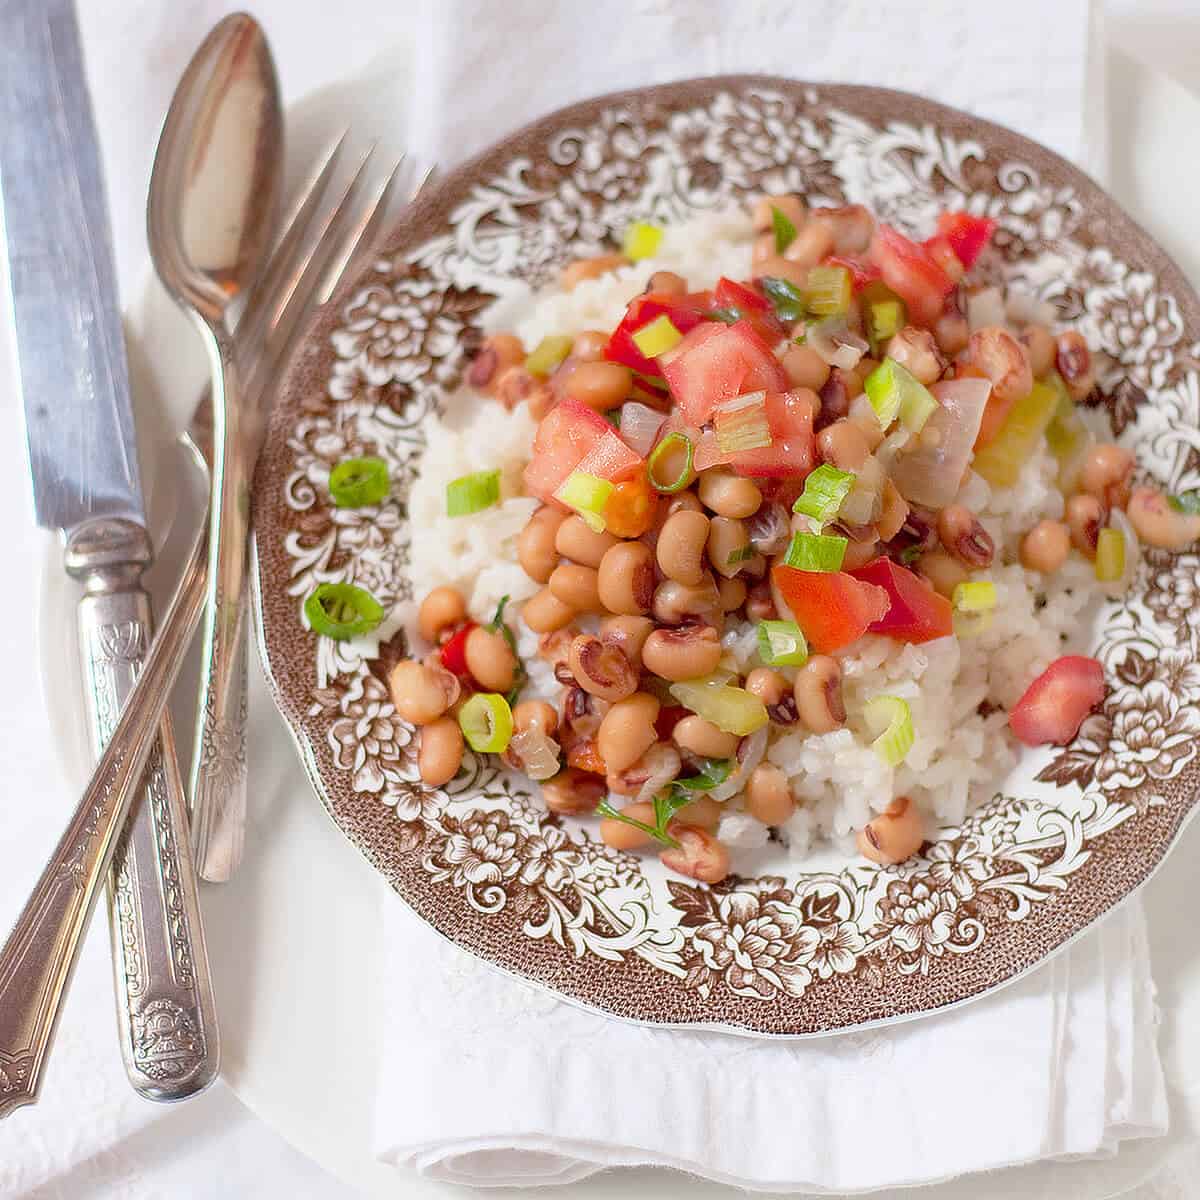 A serving of Hoppin' John on a vintage plate with antique flatware.